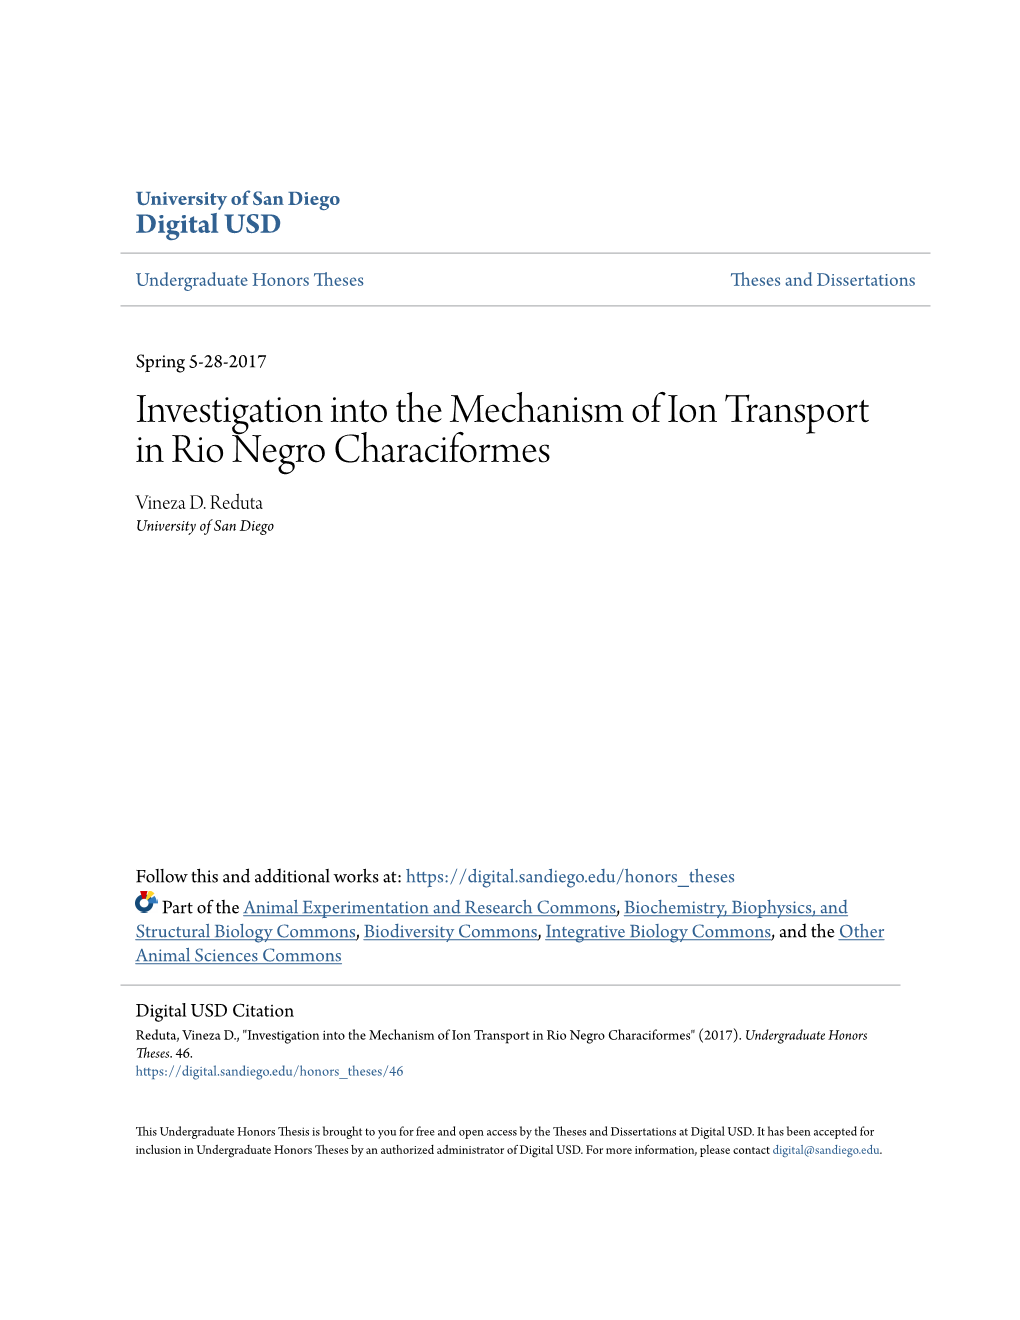 Investigation Into the Mechanism of Ion Transport in Rio Negro Characiformes Vineza D